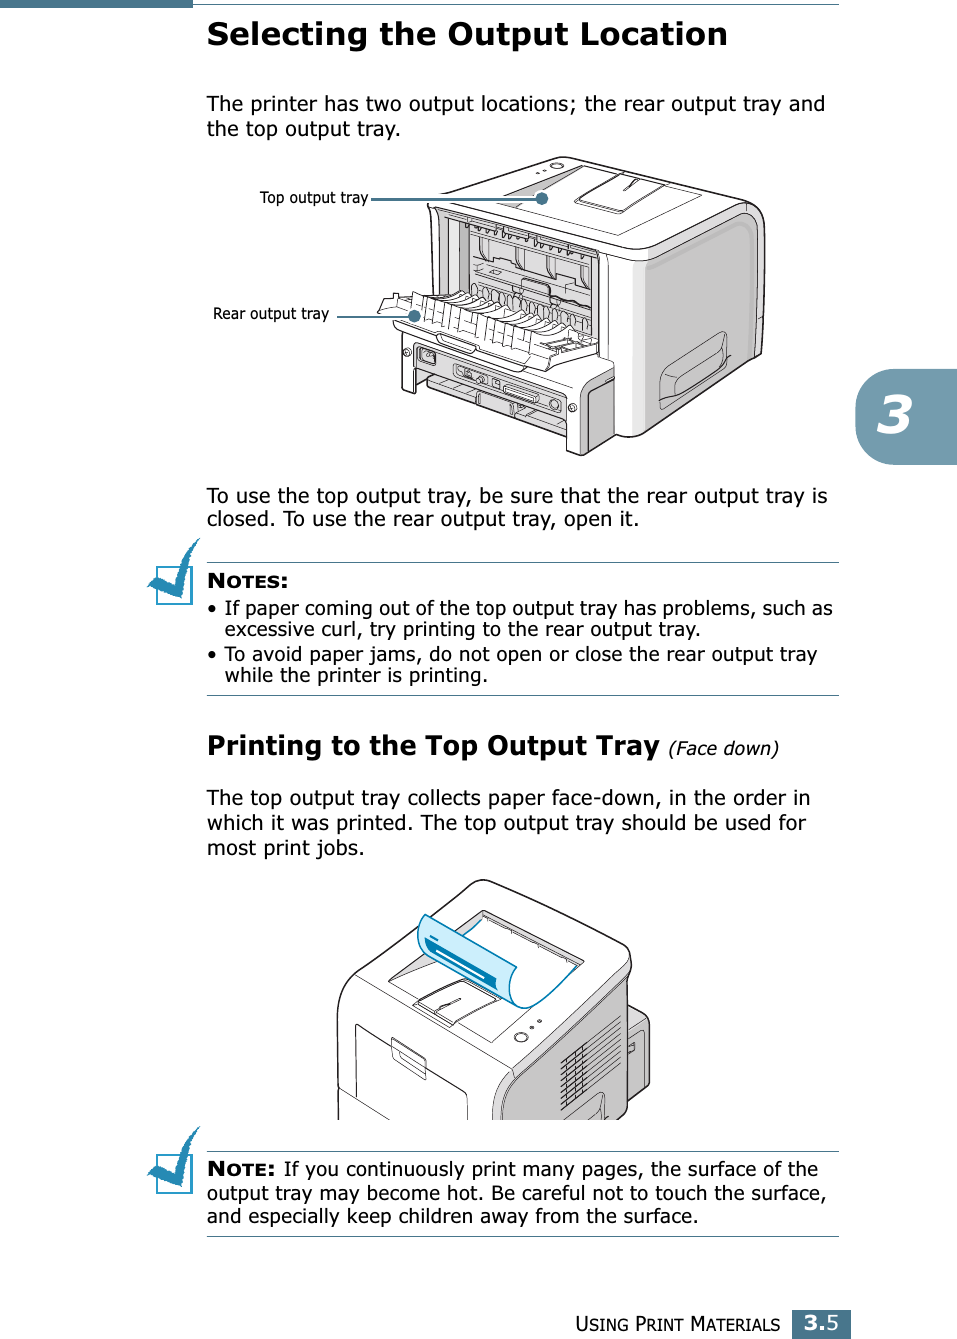 USING PRINT MATERIALS3.53Selecting the Output LocationThe printer has two output locations; the rear output tray and the top output tray. To use the top output tray, be sure that the rear output tray is closed. To use the rear output tray, open it.NOTES:• If paper coming out of the top output tray has problems, such as excessive curl, try printing to the rear output tray.• To avoid paper jams, do not open or close the rear output tray while the printer is printing.Printing to the Top Output Tray (Face down)The top output tray collects paper face-down, in the order in which it was printed. The top output tray should be used for most print jobs.NOTE: If you continuously print many pages, the surface of the output tray may become hot. Be careful not to touch the surface, and especially keep children away from the surface.Top output trayRear output tray